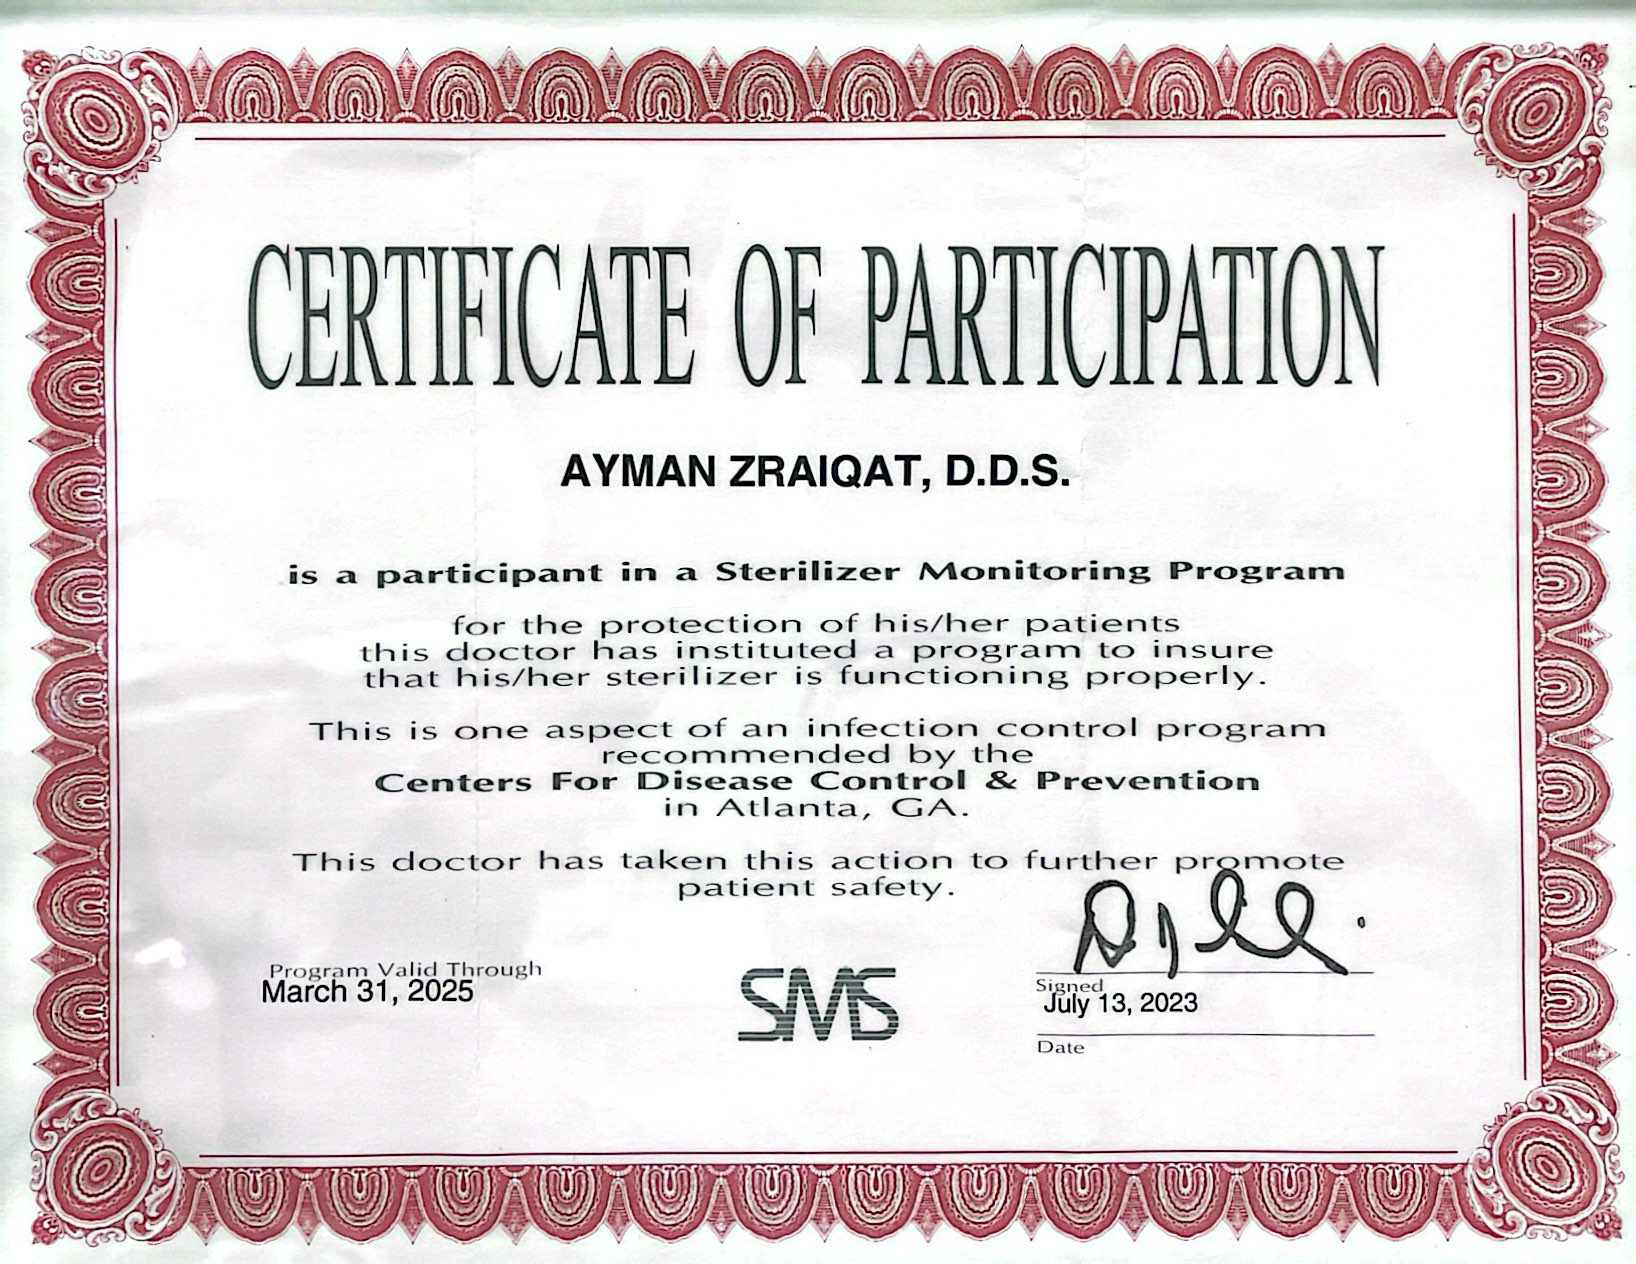 Certificate of participation for Ayman Zraiqat, D.D.S., in a Sterilizer Monitoring Program, valid through March 31, 2025.